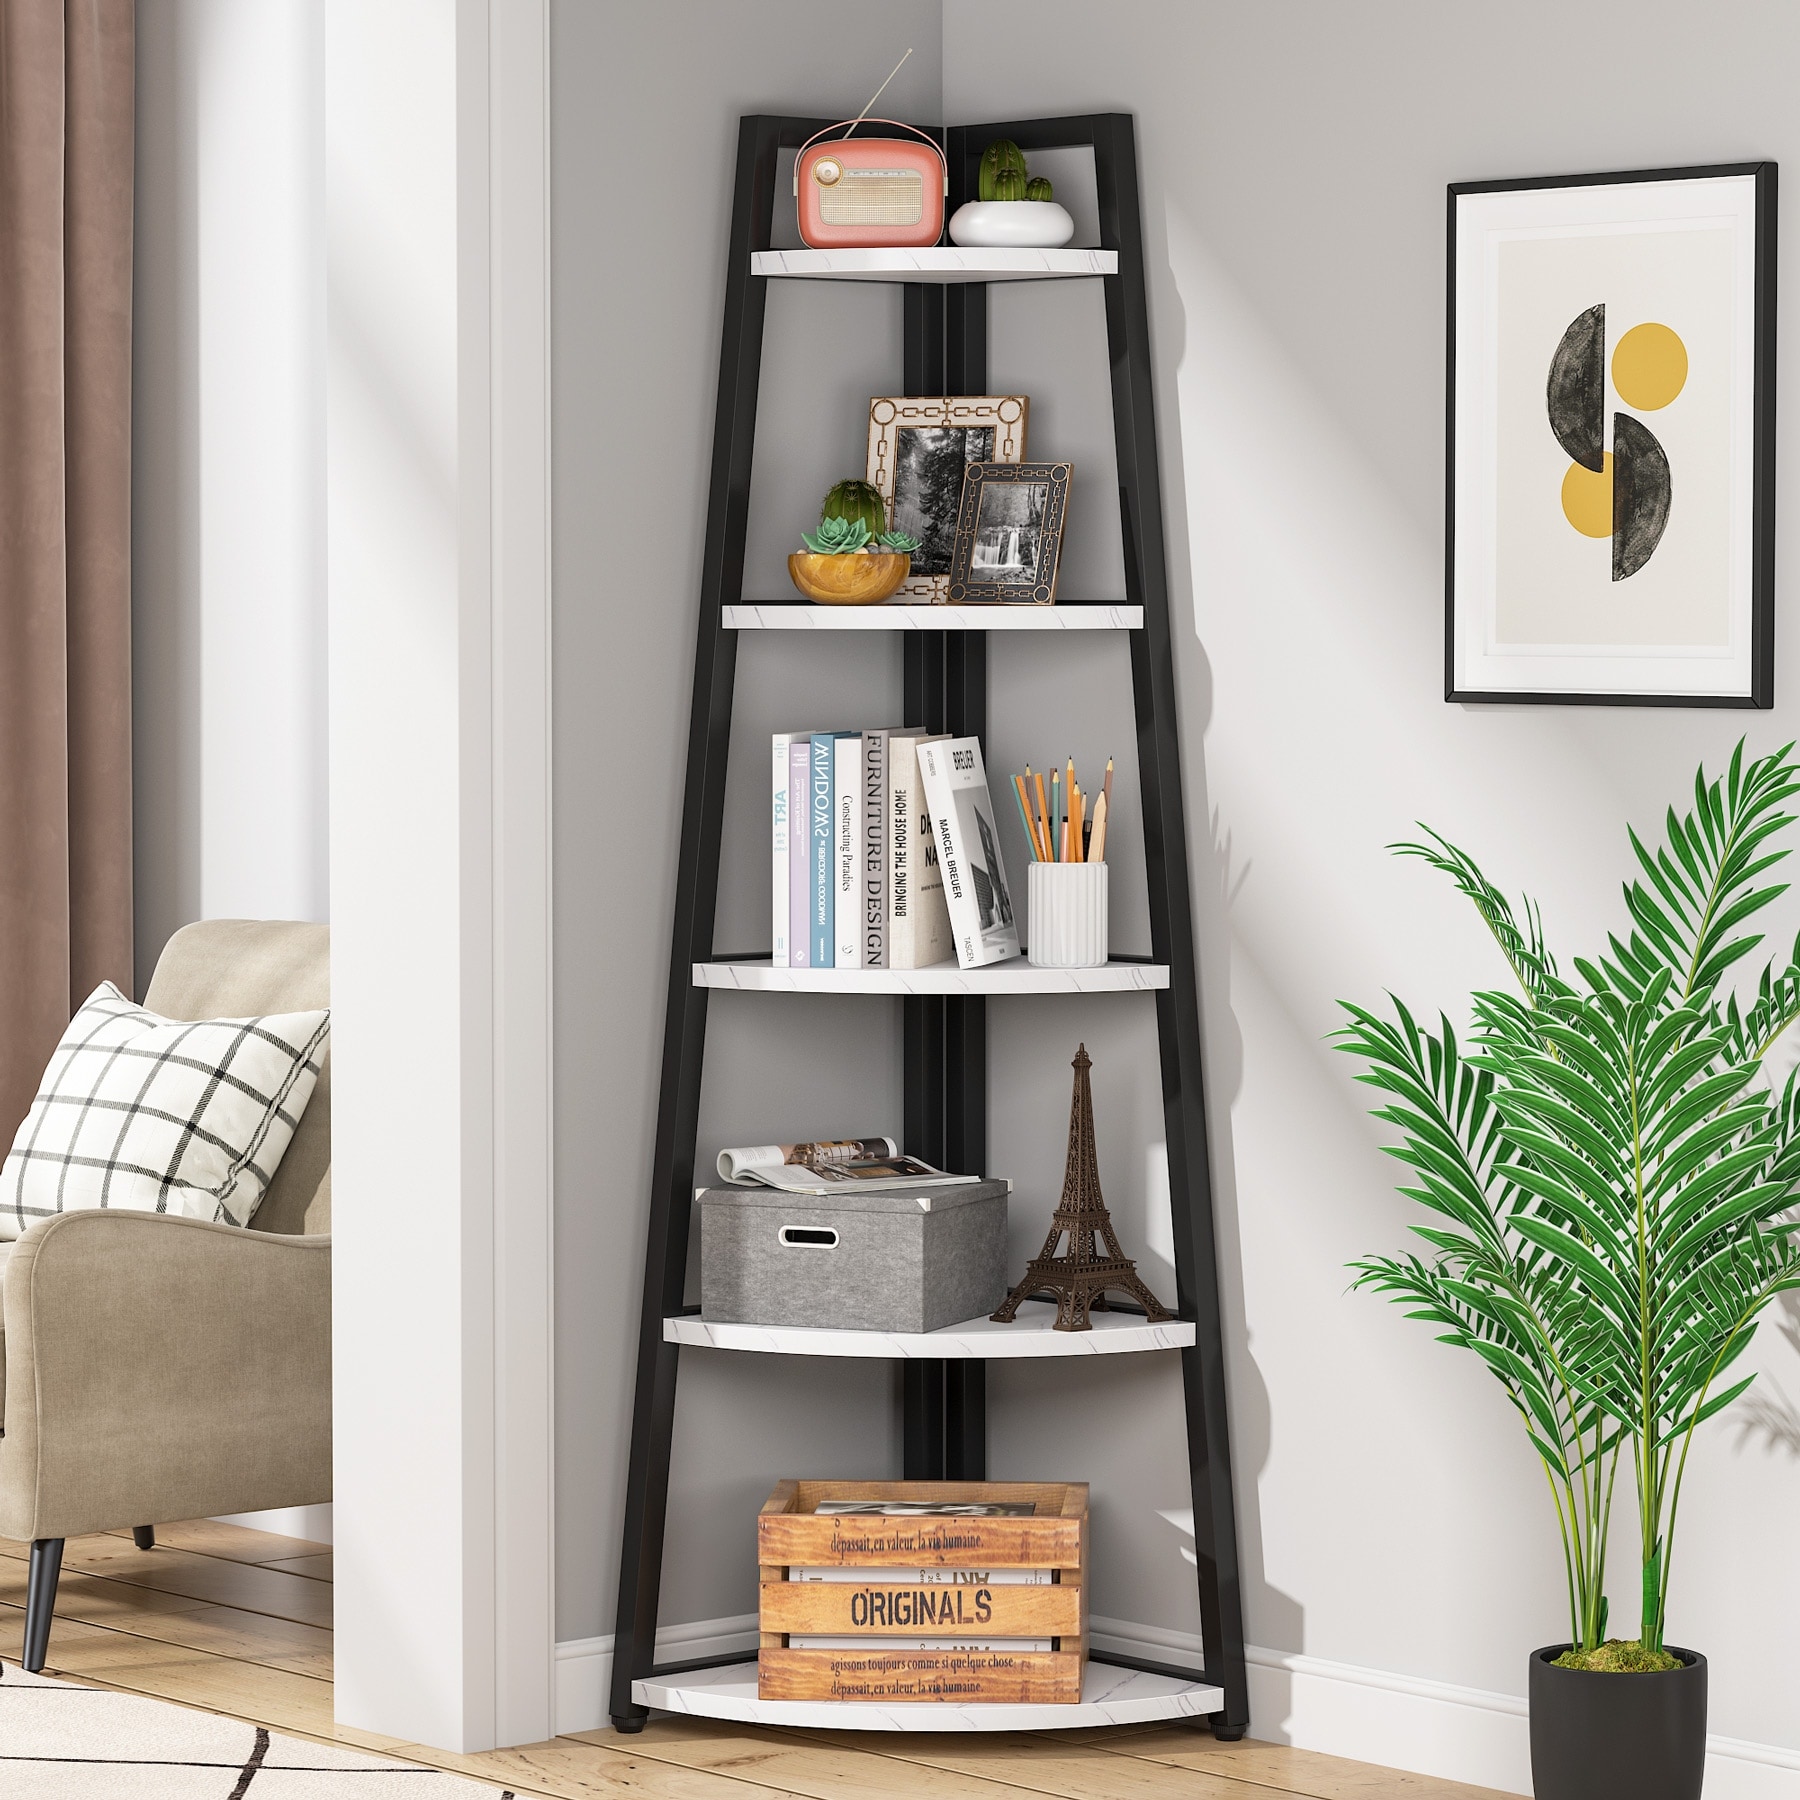 Bookcase, 4-Tier White Bookshelf with 2 Drawers, Etagere Standard Book Shelves Display Shelf for Home Office (White) Latitude Run